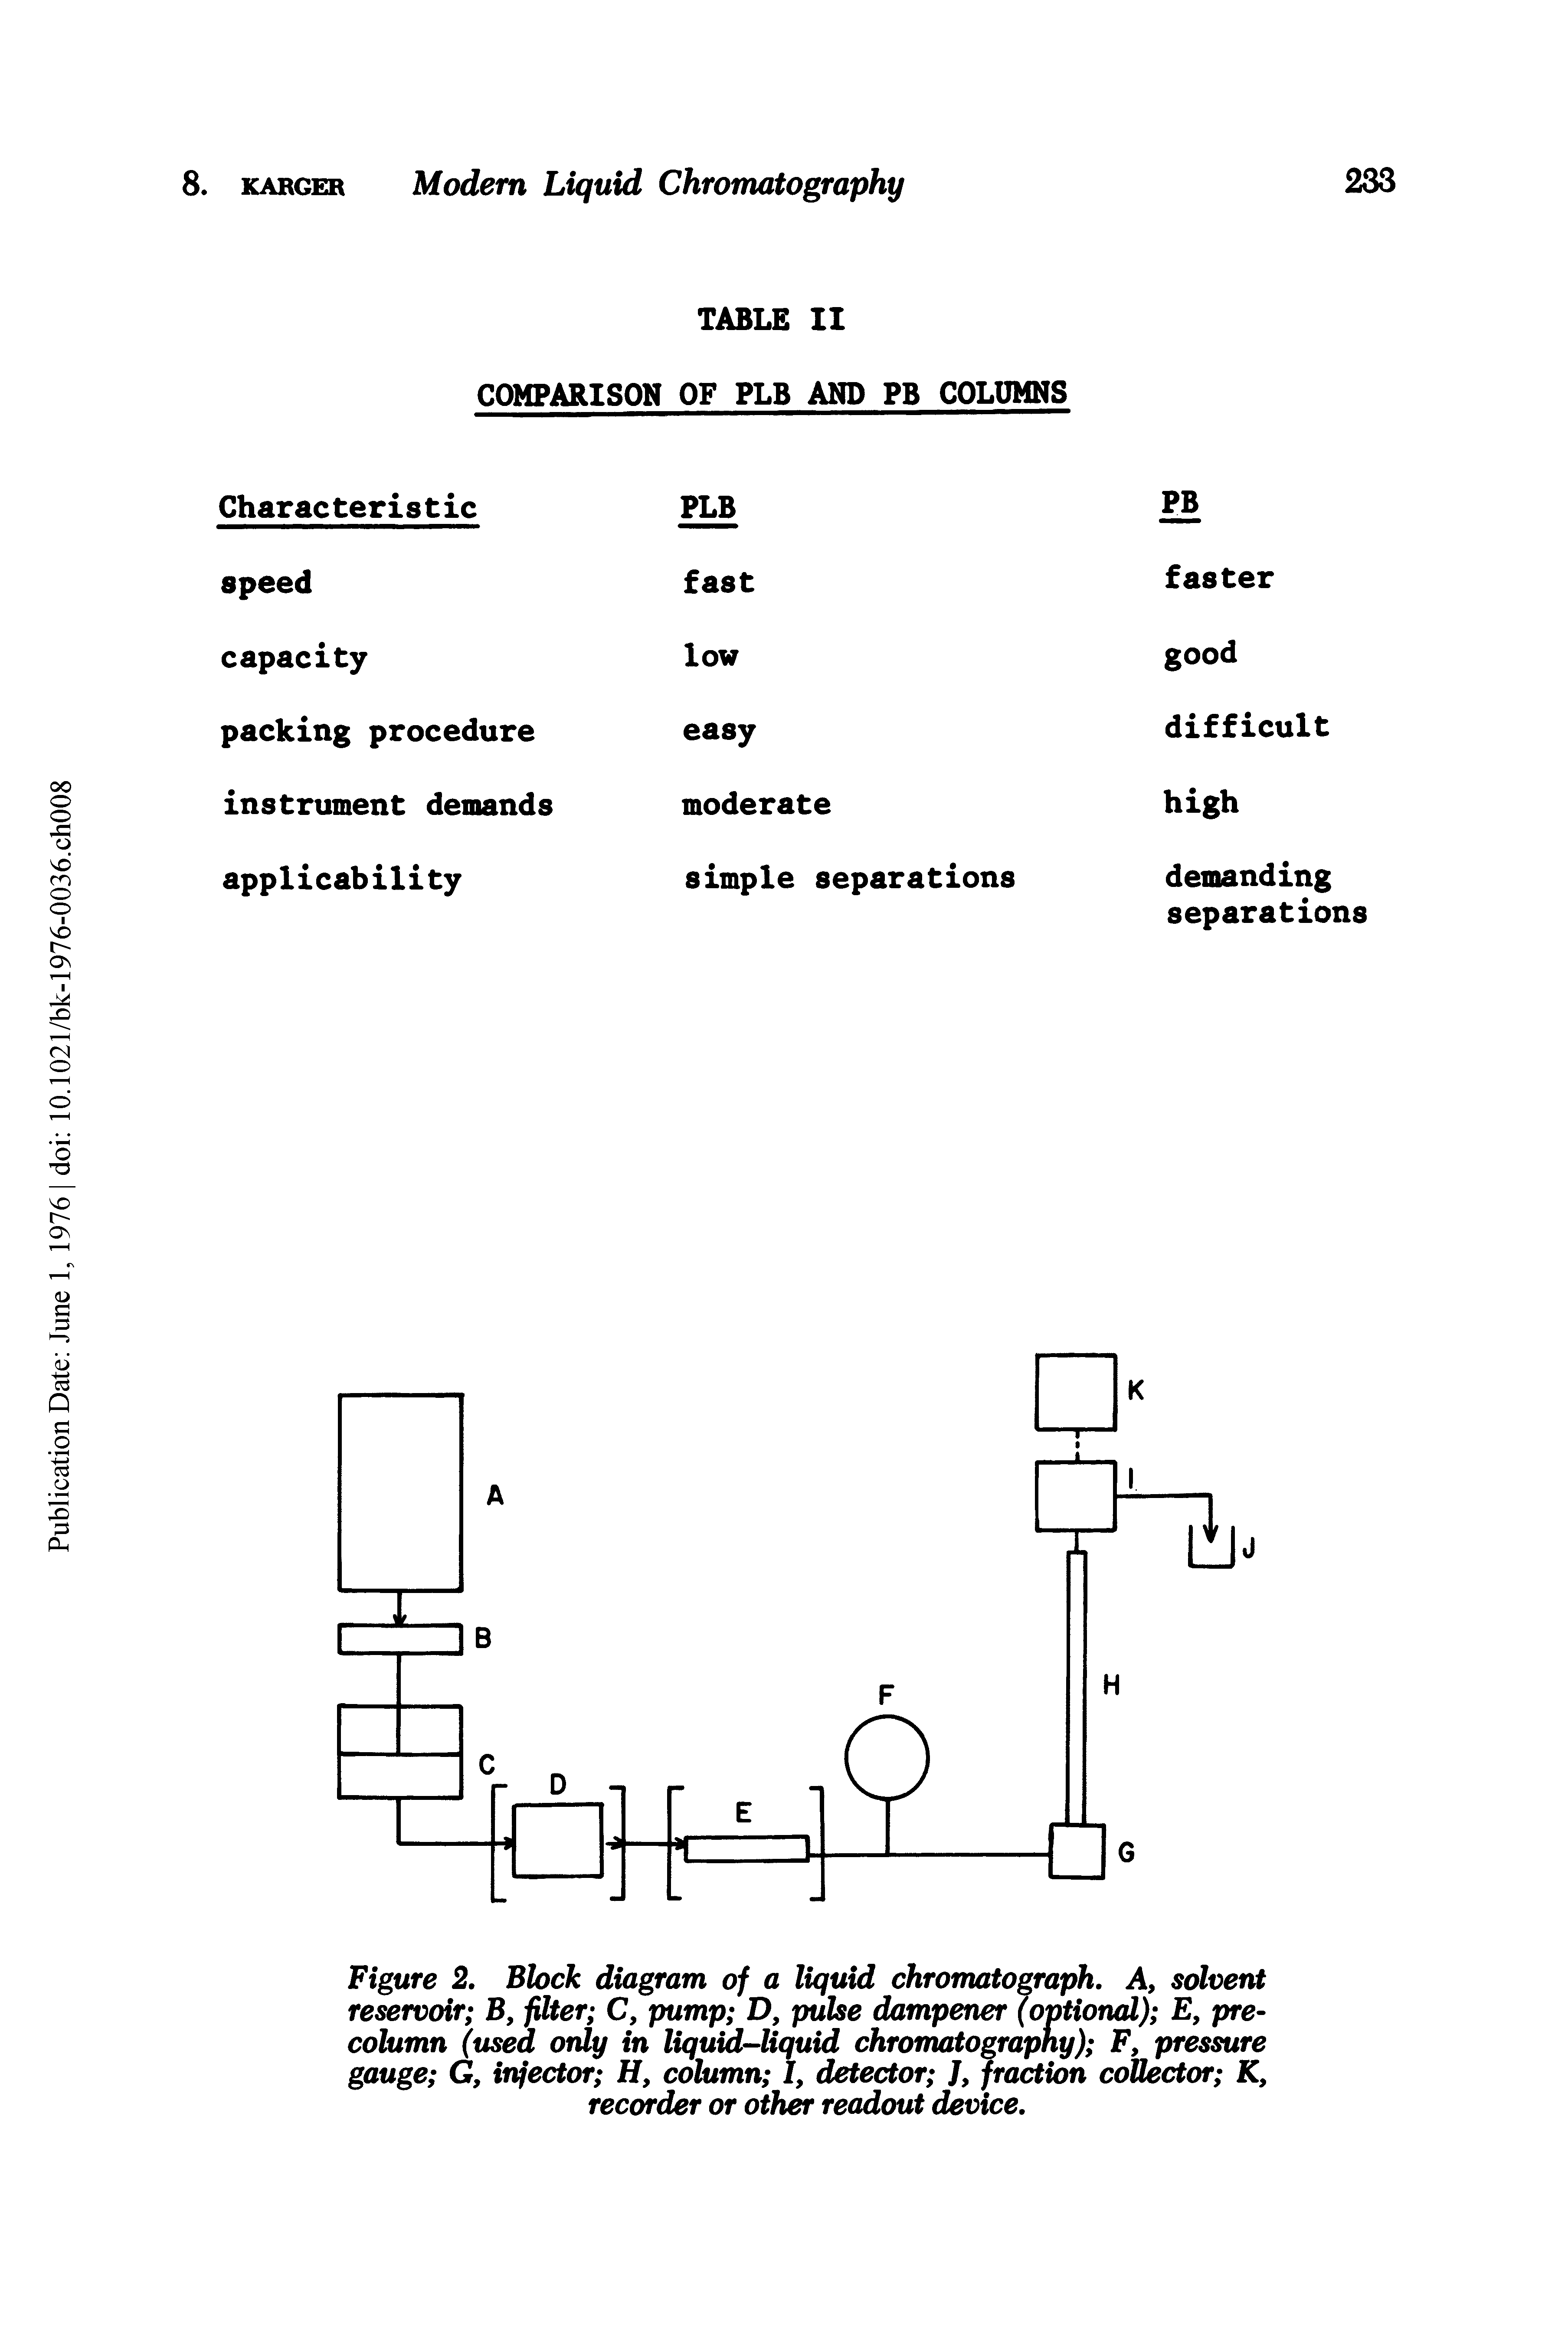 Figure 2, Block diagram of a liquid chromatograph. A, solvent reservoir B, filter C, pump D, pulse dampener (optional) E, pre-column (used only in liquid-liquid chromatography) F, pressure gauge G, infector H, column I, detector J, fraction collector K, recorder or oth readout device.